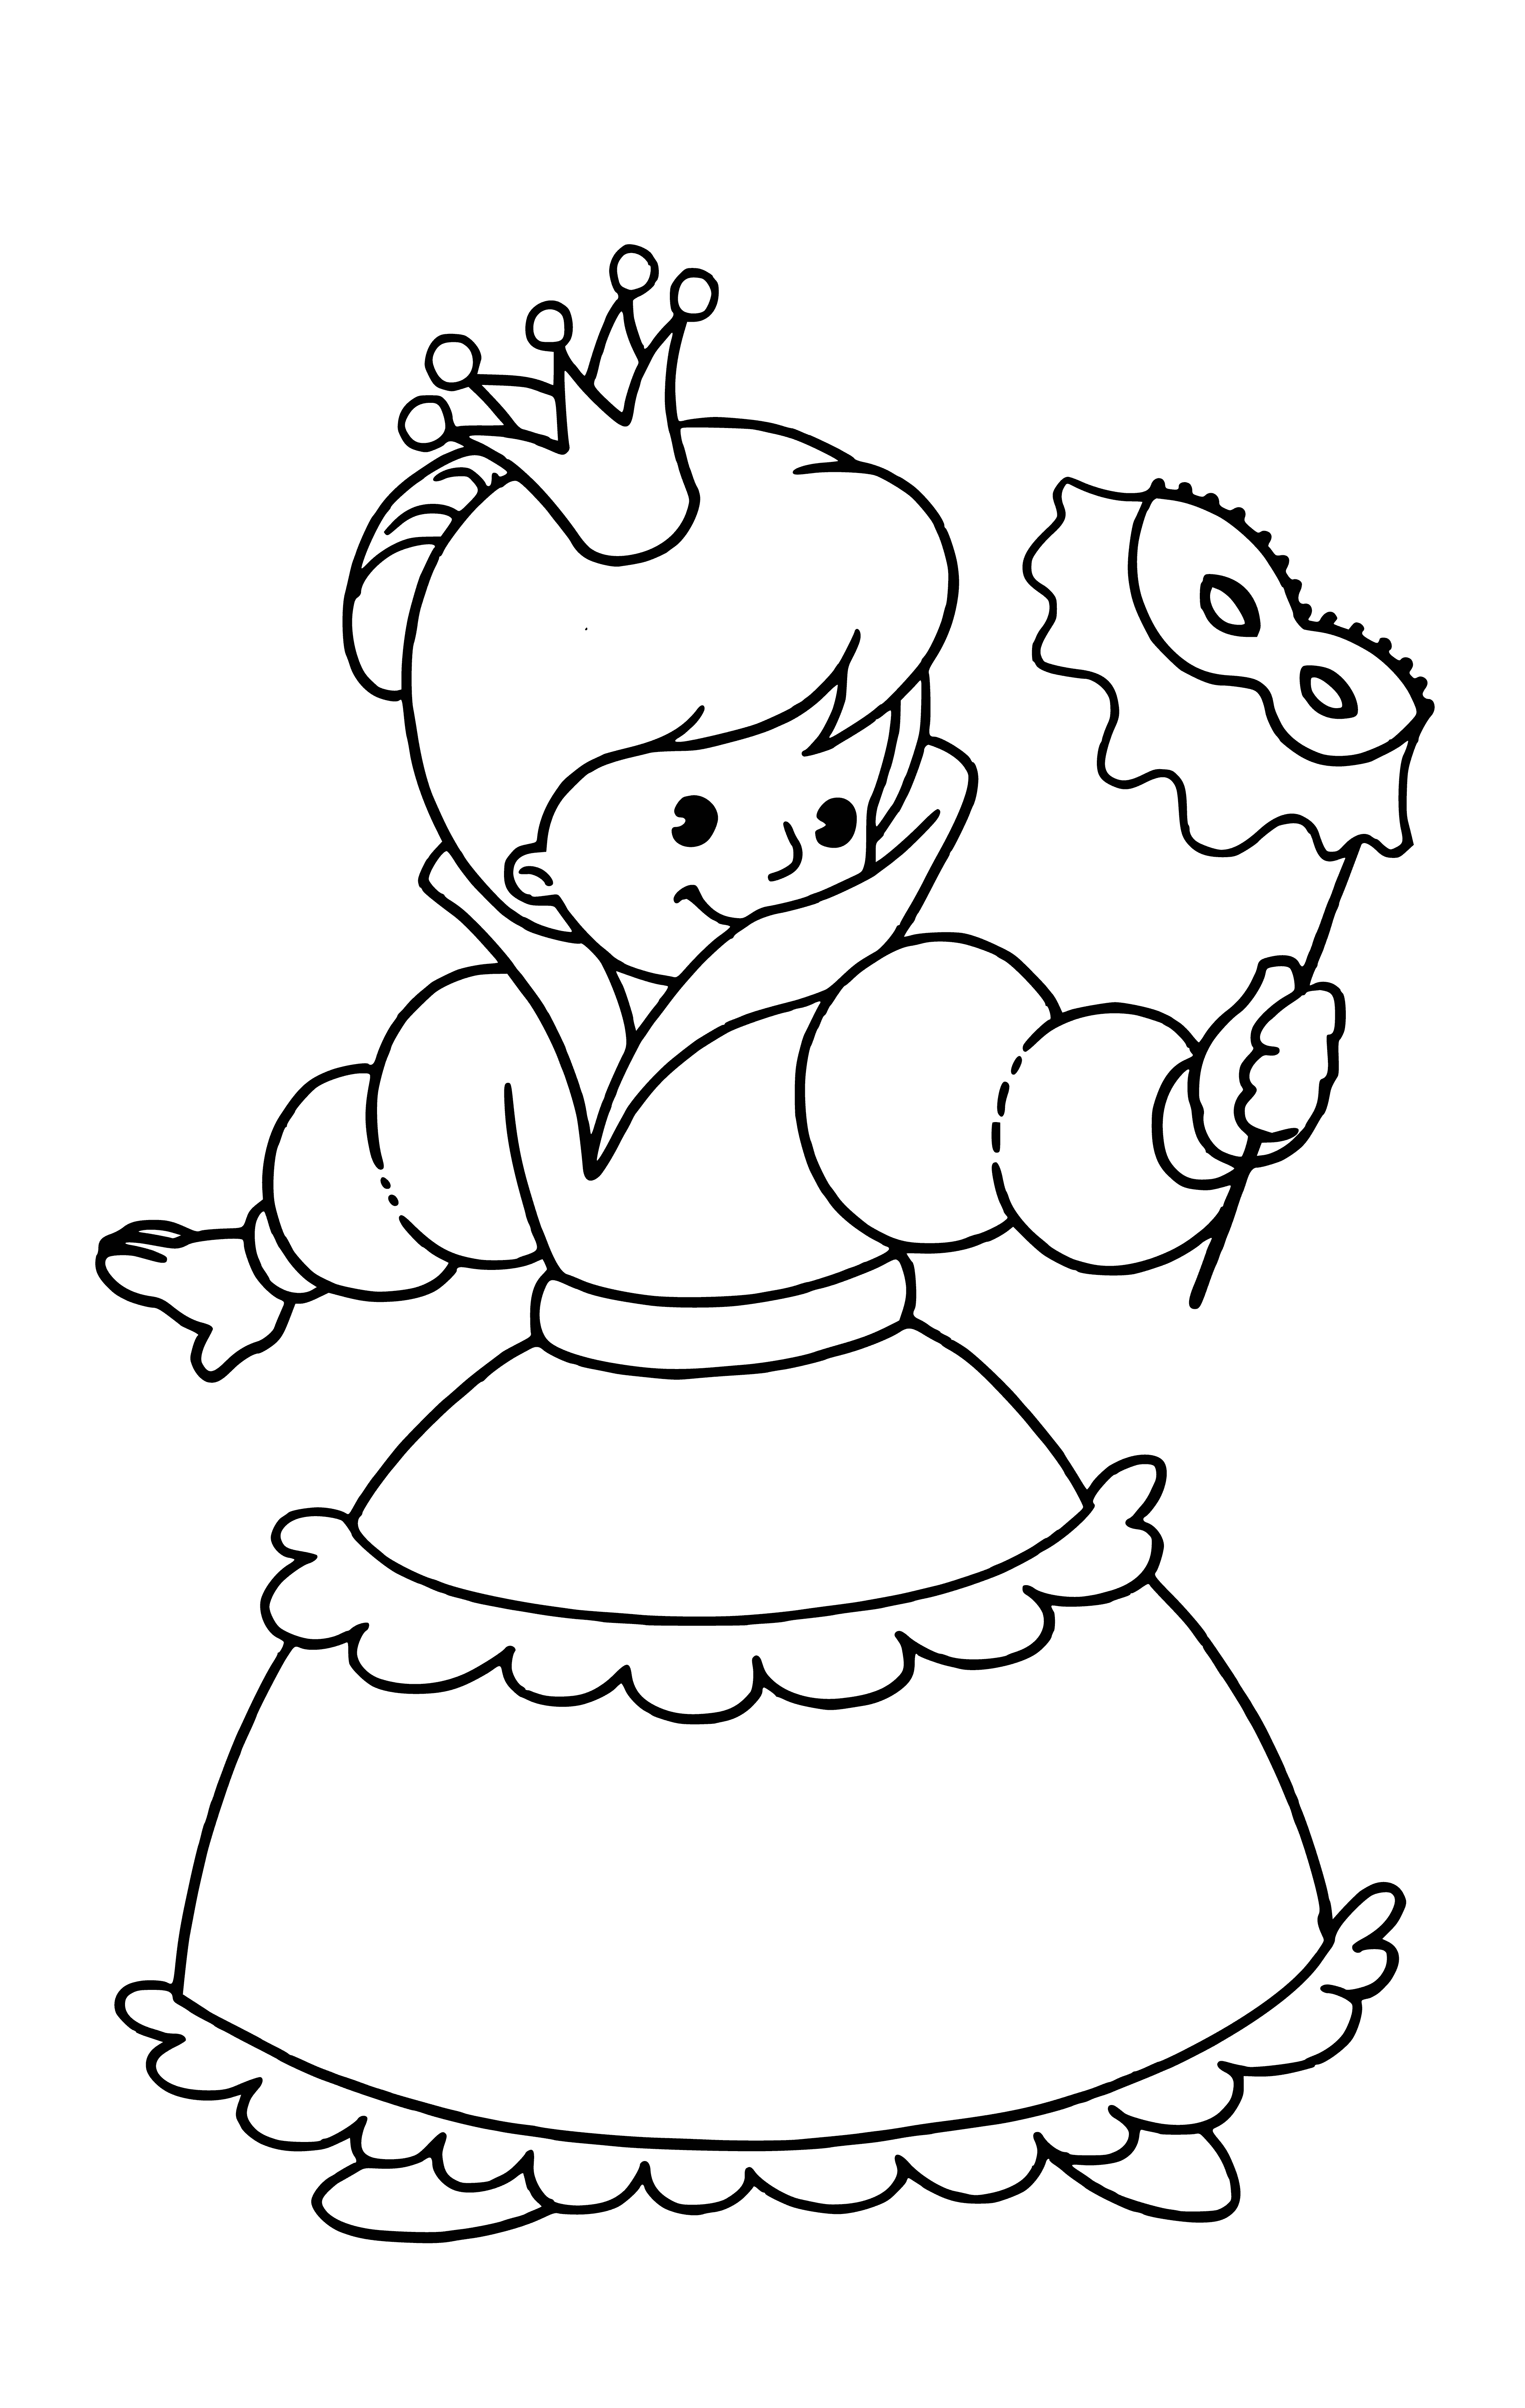 coloring page: A girl in a pink skirt and white top with a pink tiara. Holding a wand with a star, ready for magic!